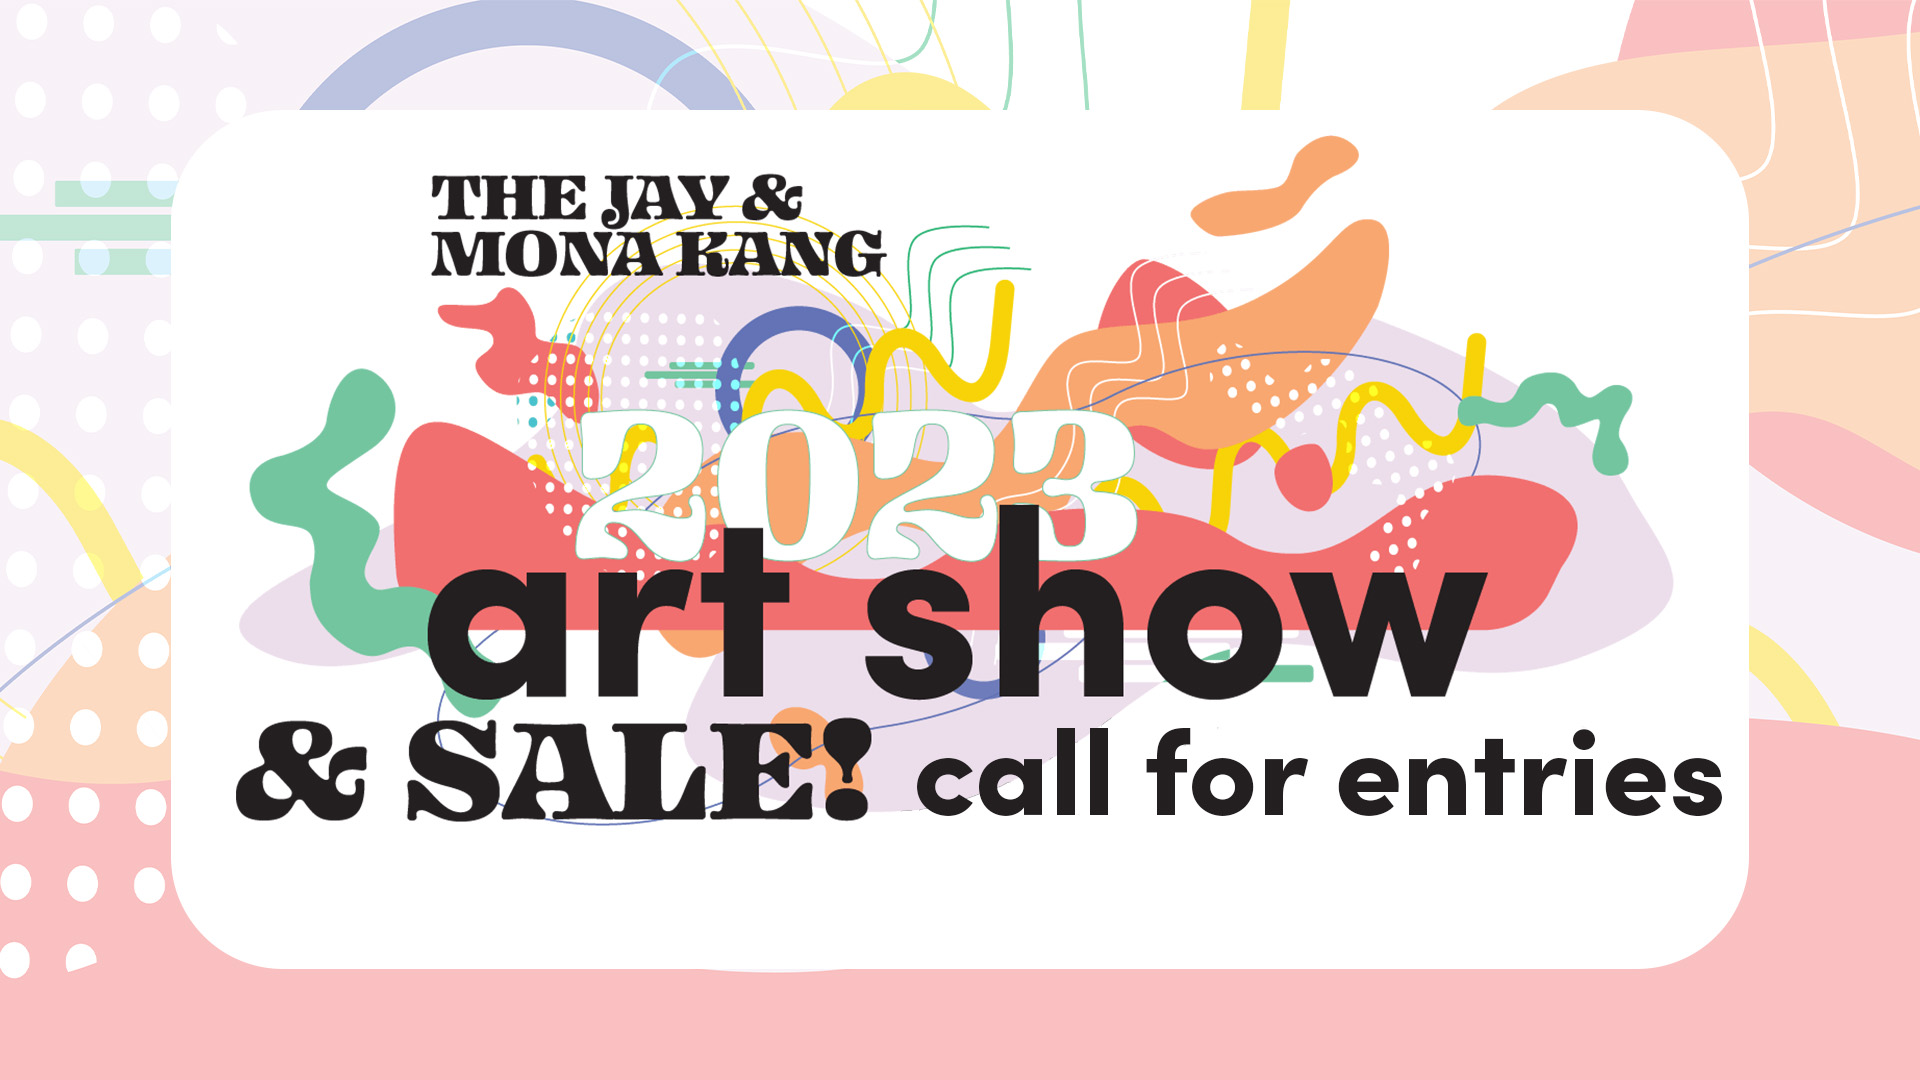 Call For Entries - The Jay & Mona Kang Art Show & Sale